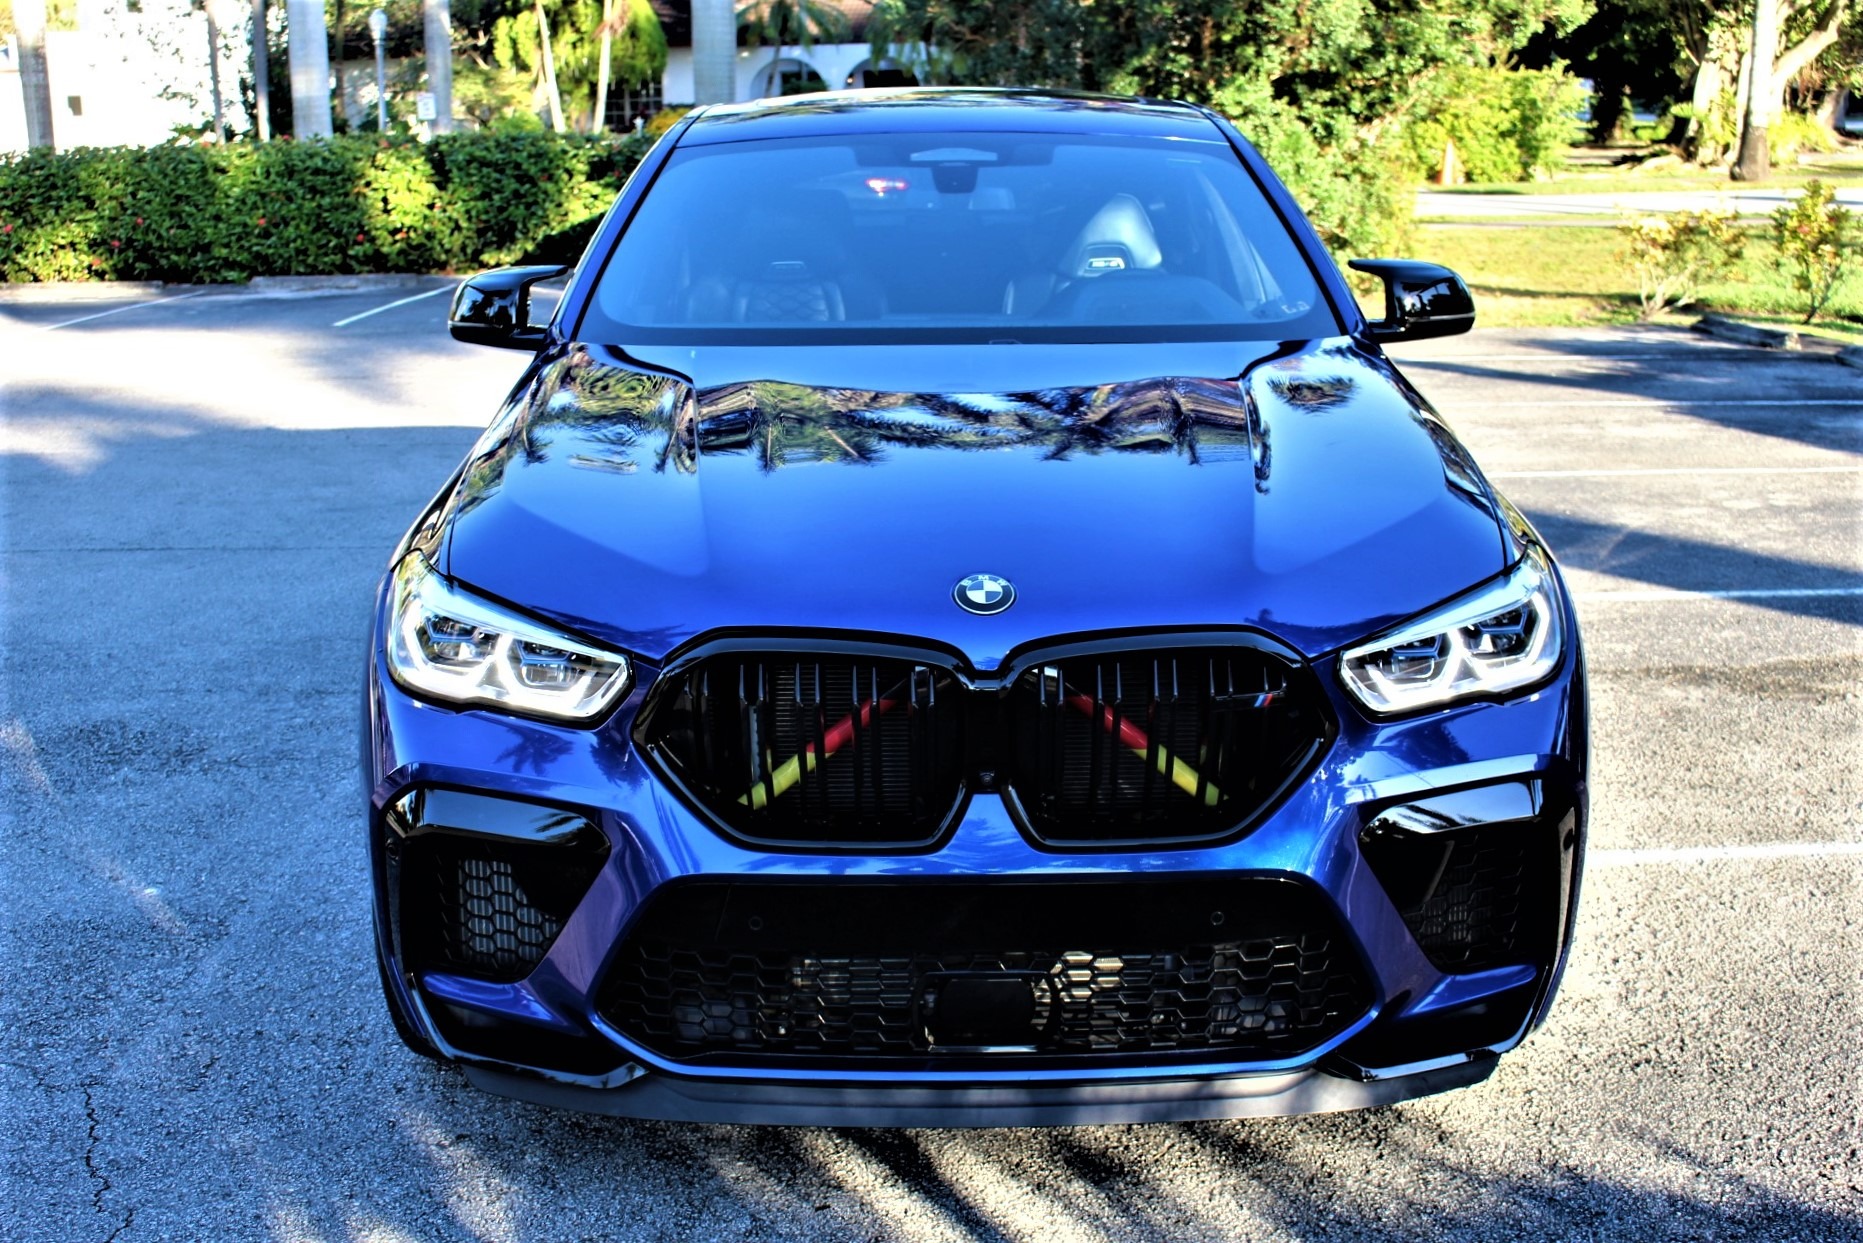 Used 2020 BMW X6 M Competition for sale $122,850 at The Gables Sports Cars in Miami FL 33146 4